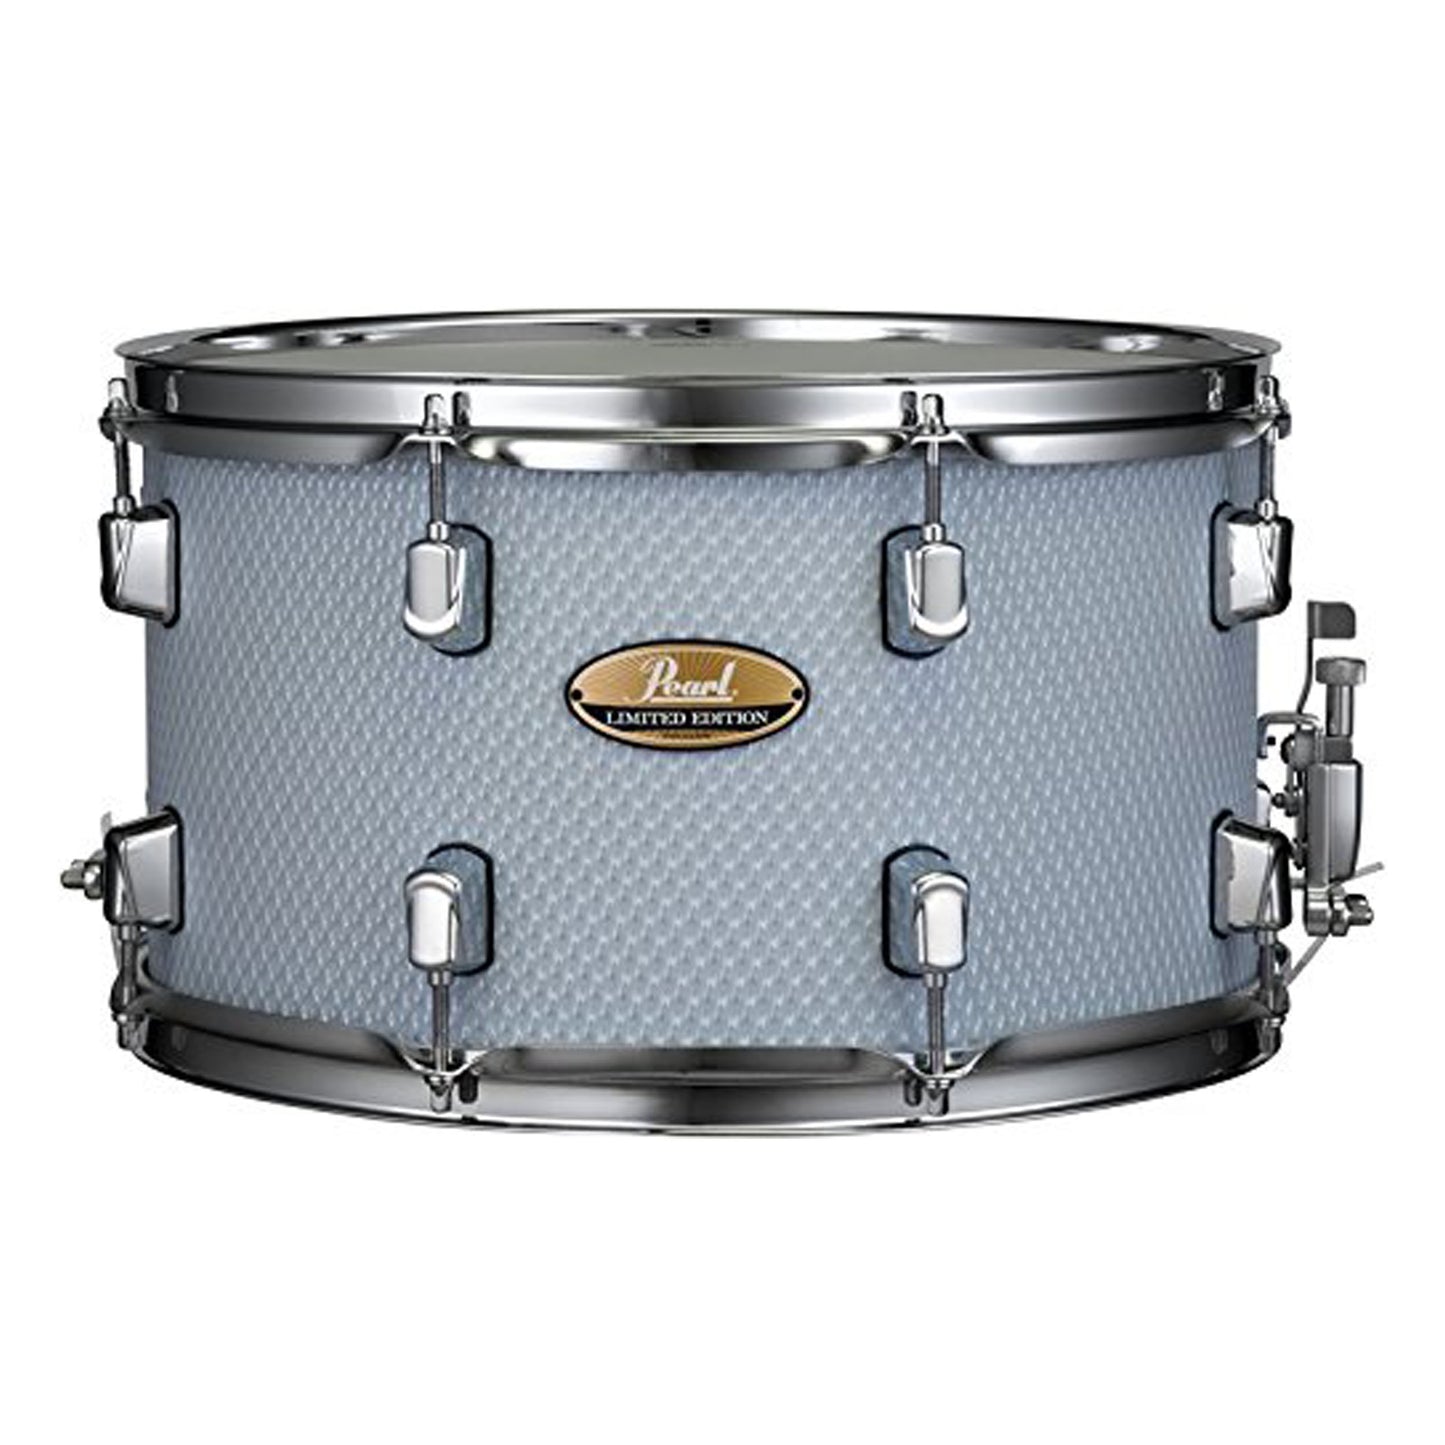 Pearl Limited Edition Maple Snare Drum - 8x14" - Honeycomb Wrap (LMPR1480SC726)